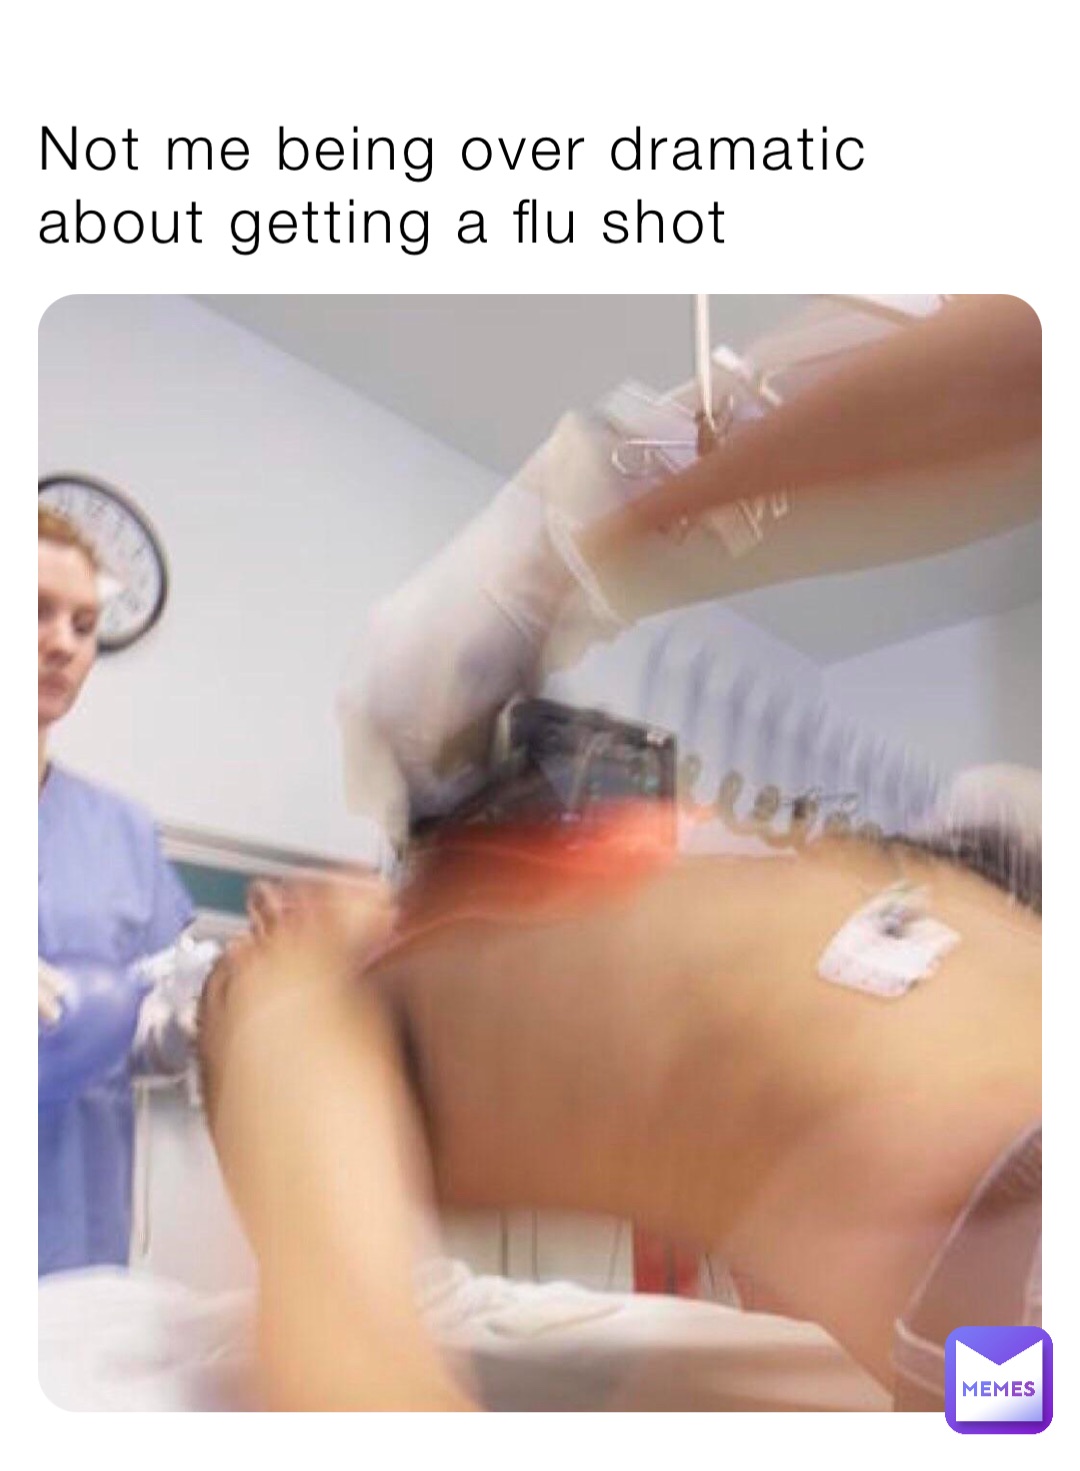 Not me being over dramatic about getting a flu shot